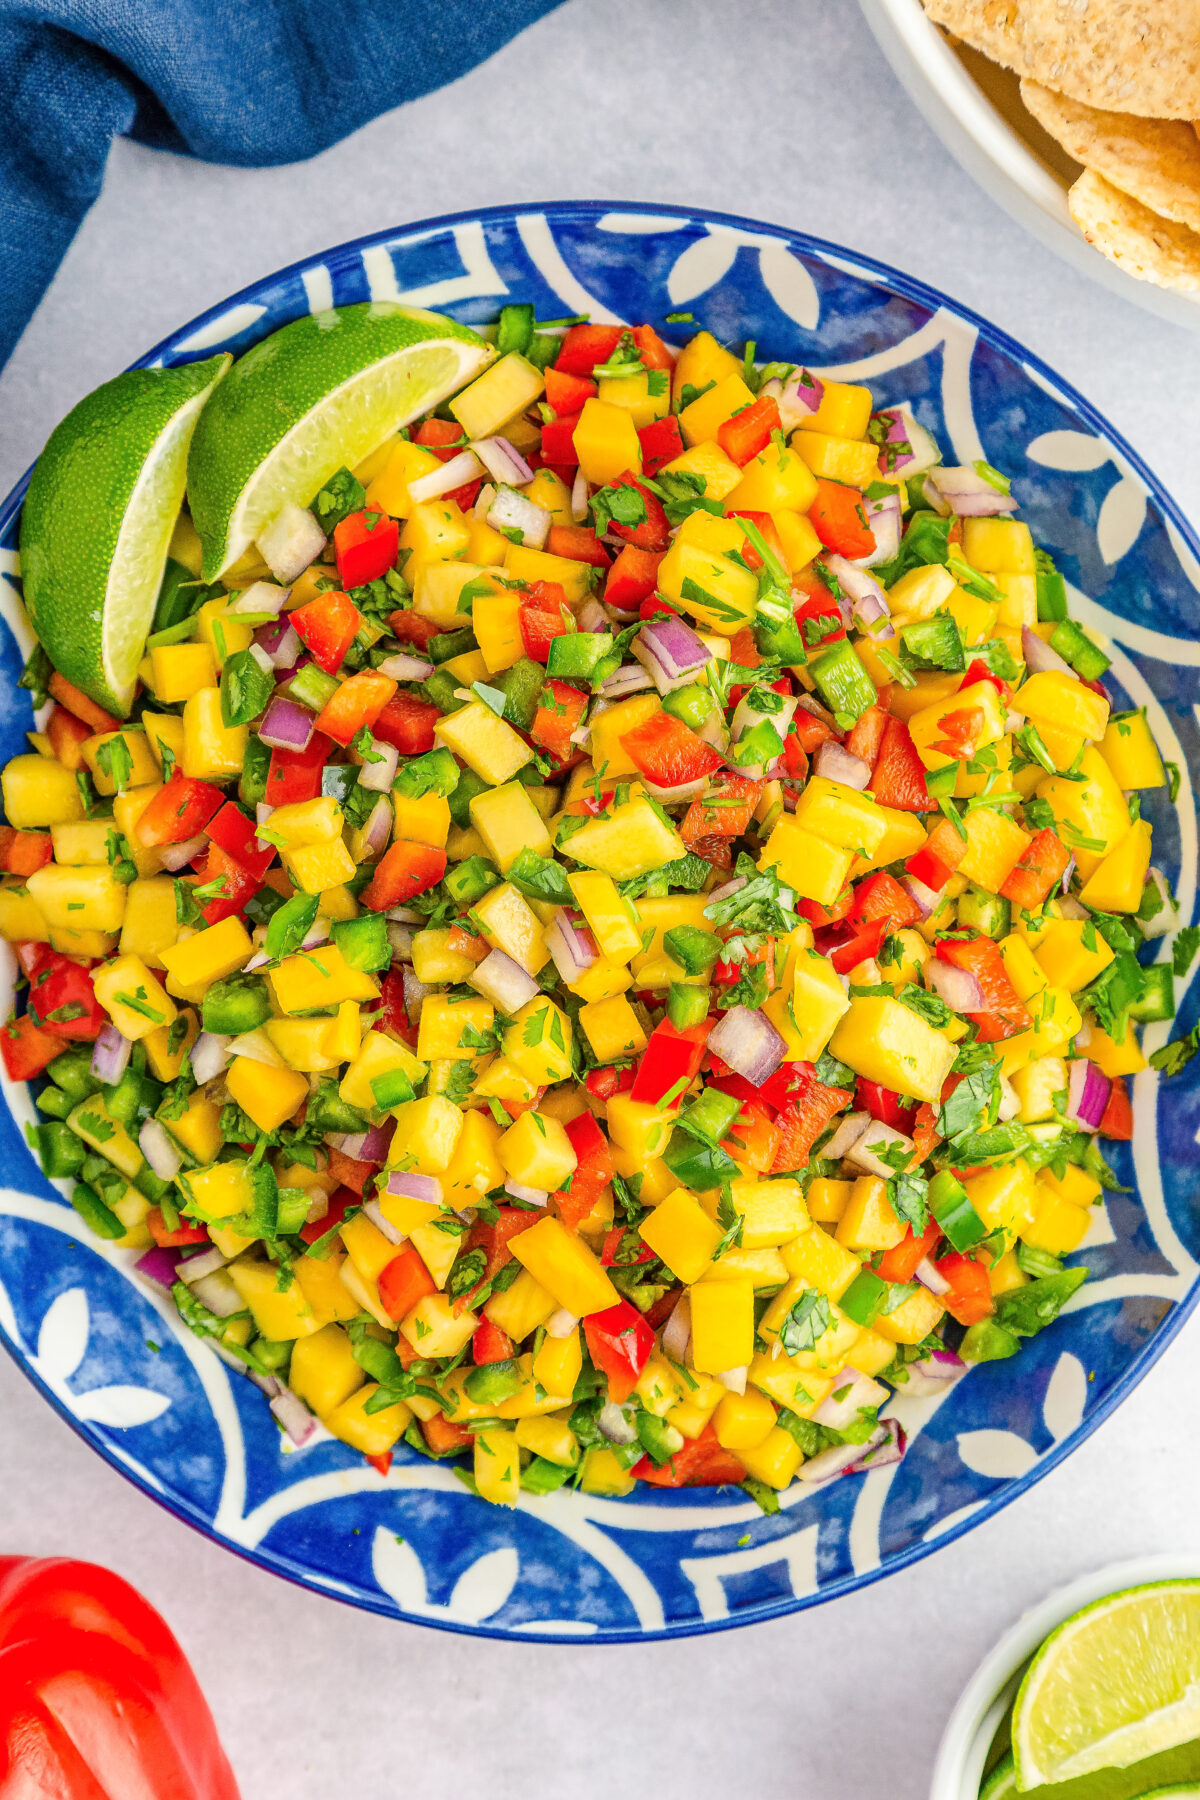 Brighten up your summer menu with this bright and zesty mango salsa. Whip it up and enjoy a tasty mix of sweet, savoury, and tangy flavours!